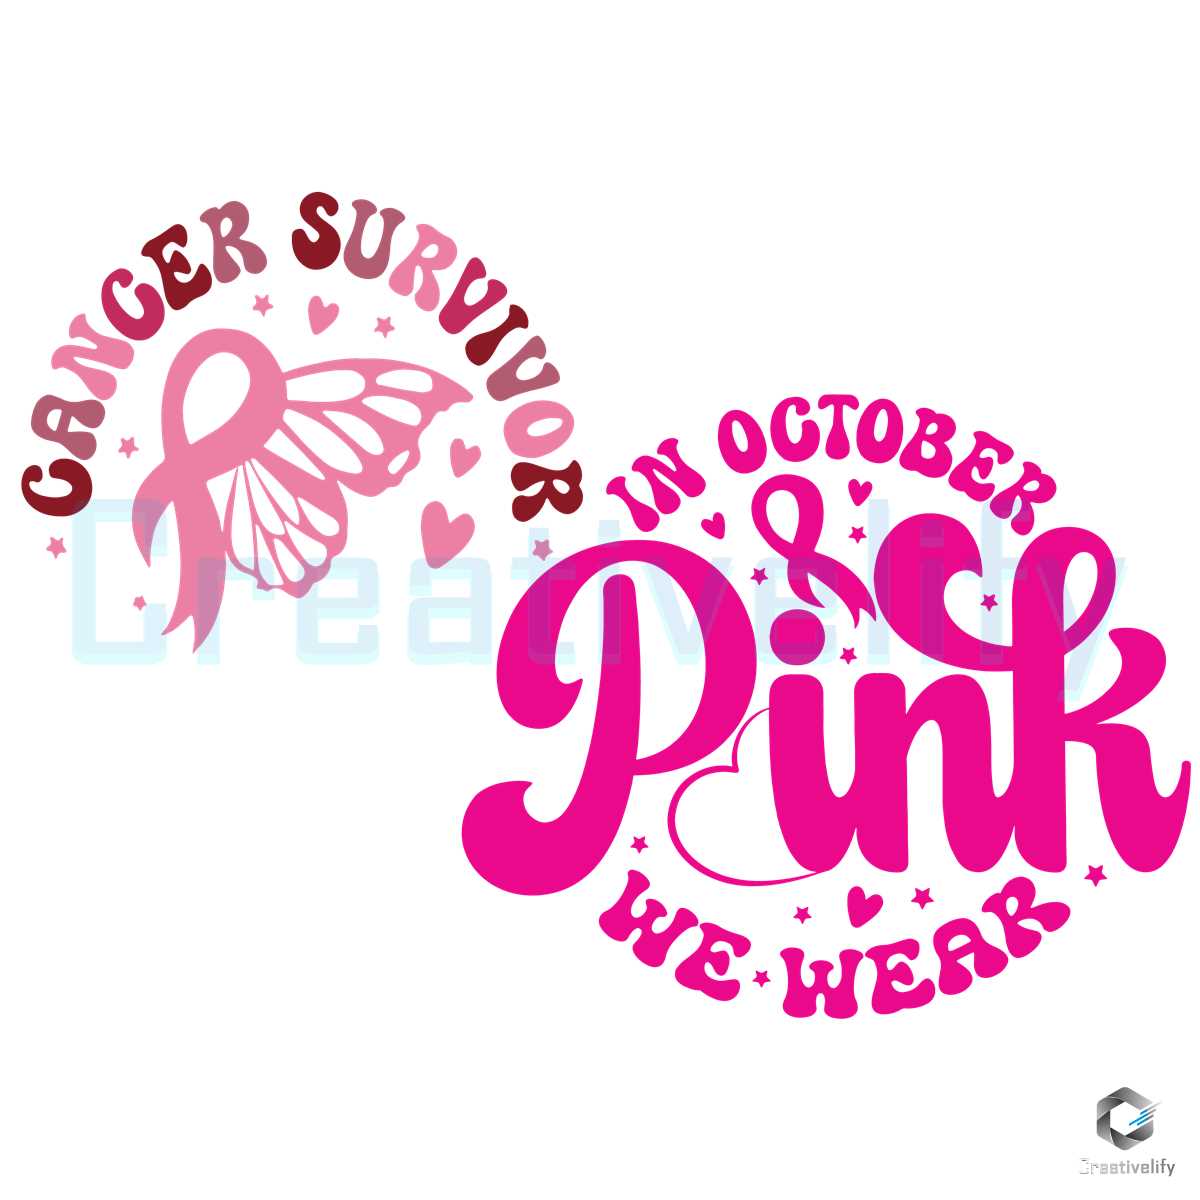 In October We Wear Purple And Pink SVG Breast Cancer Cricut File